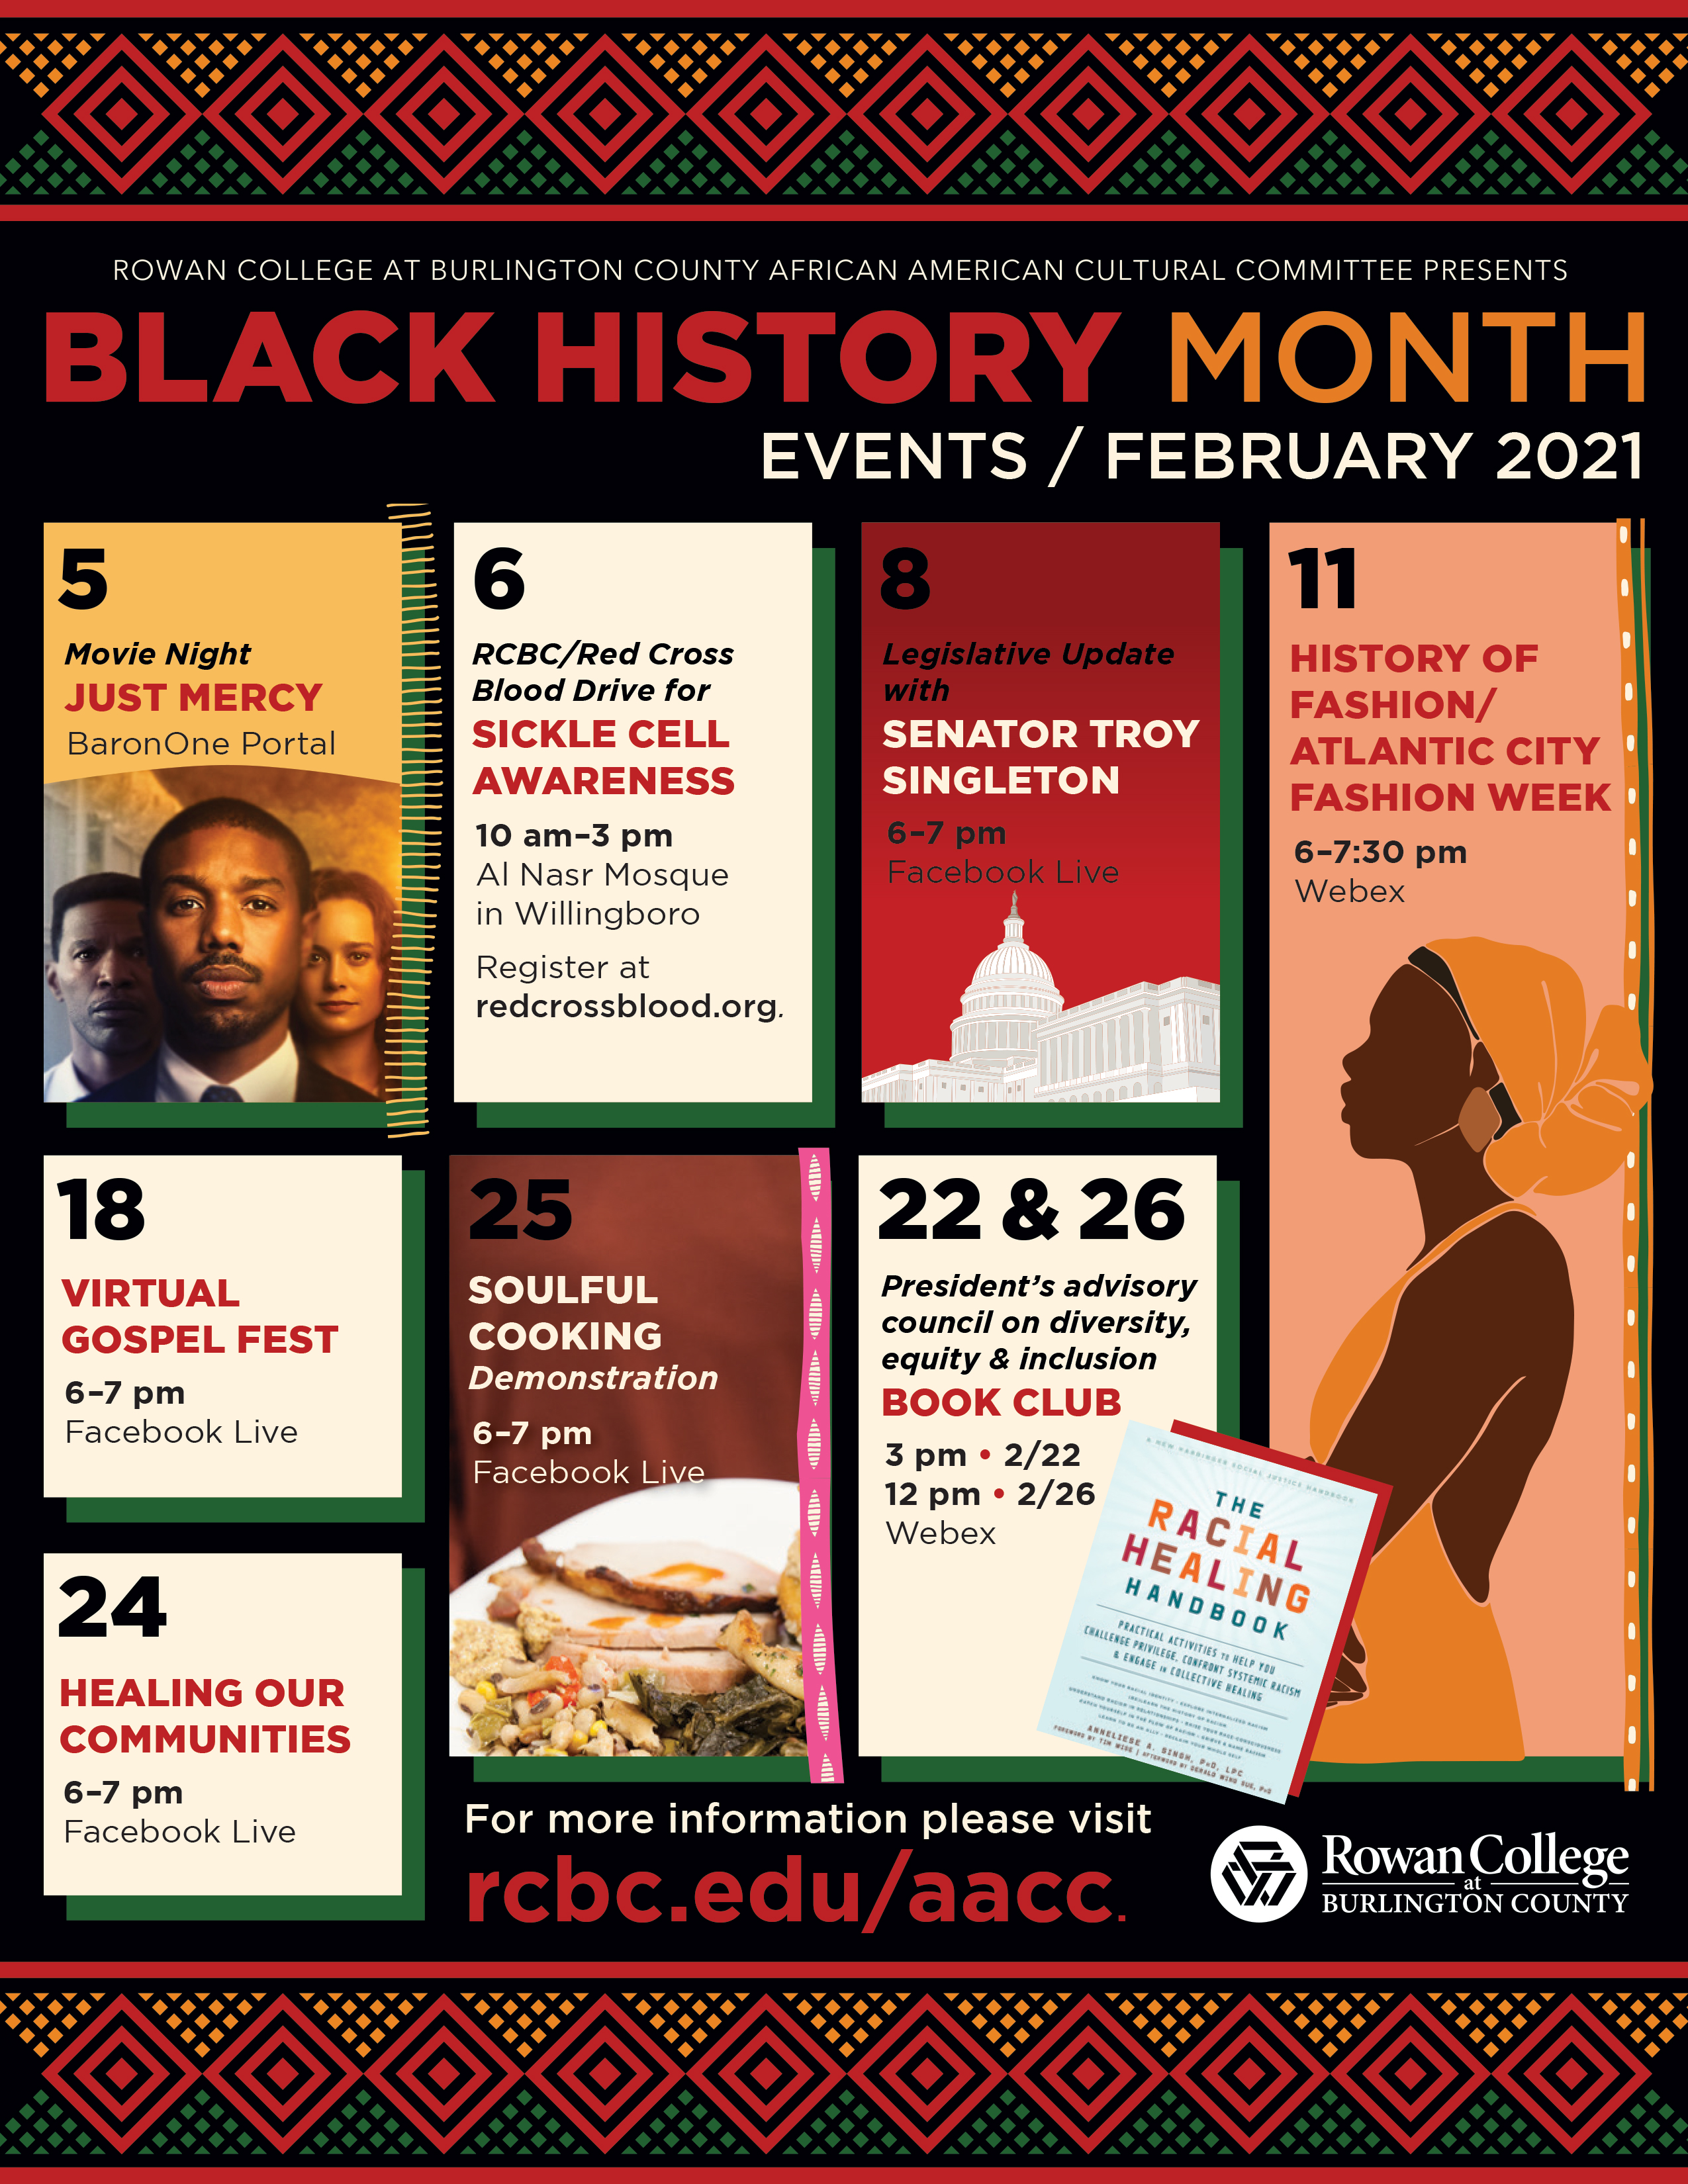 Black History Month calendar of events